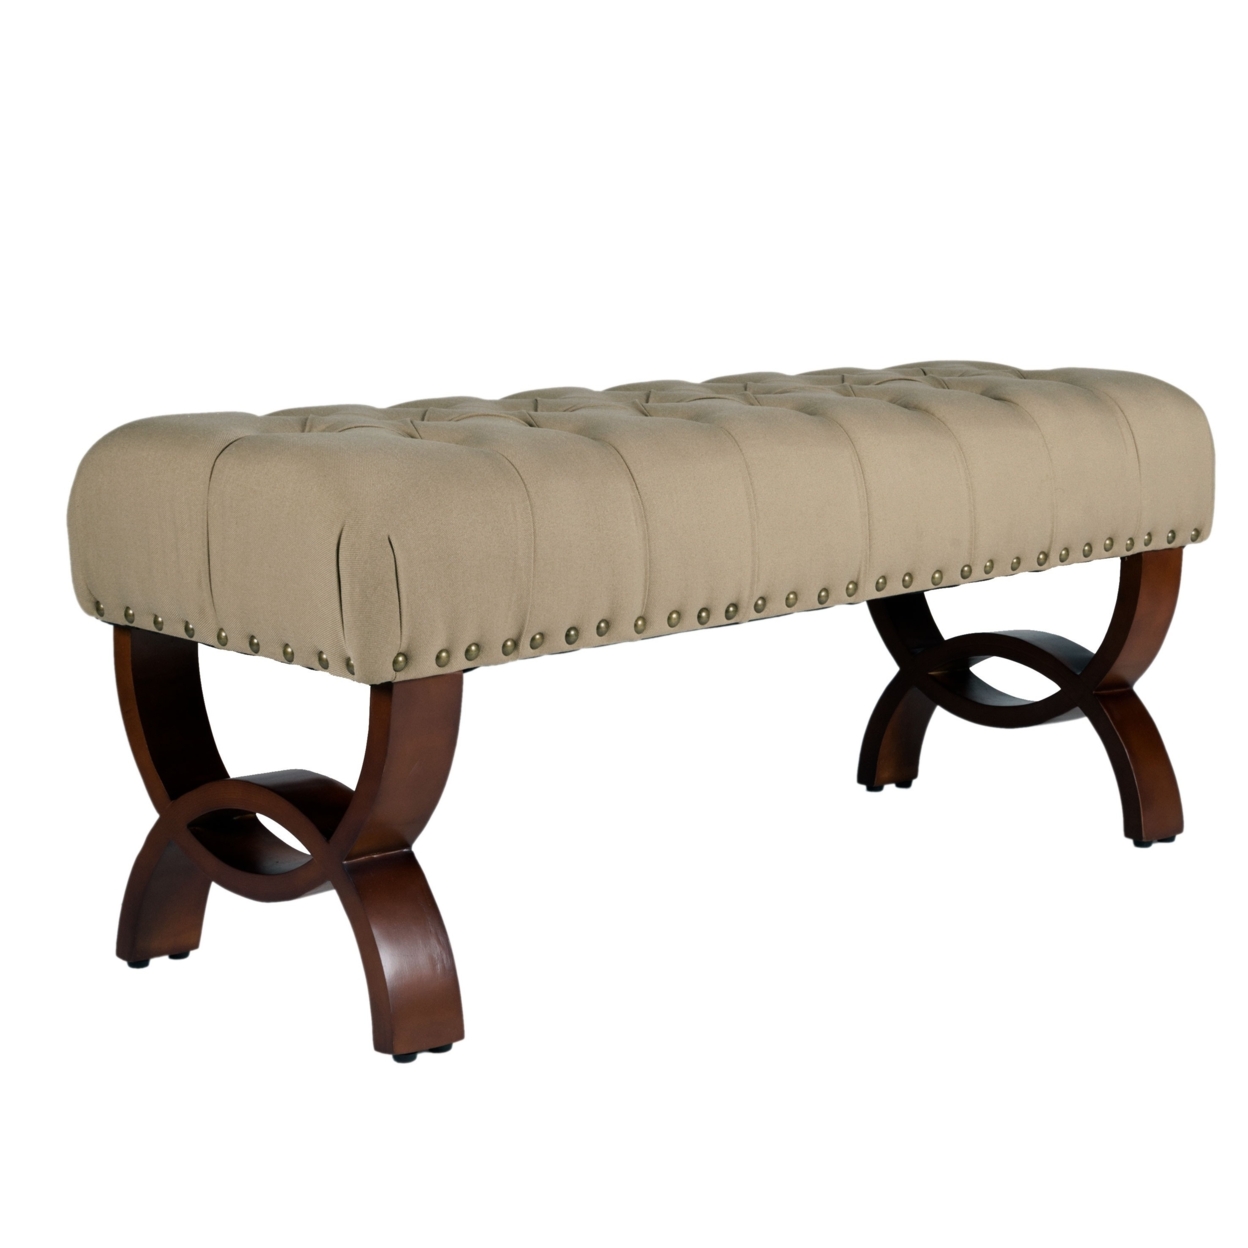 Wooden Bench With Button Tufted Fabric Padded Seat And Nail Head Trim, Beige And Brown- Saltoro Sherpi